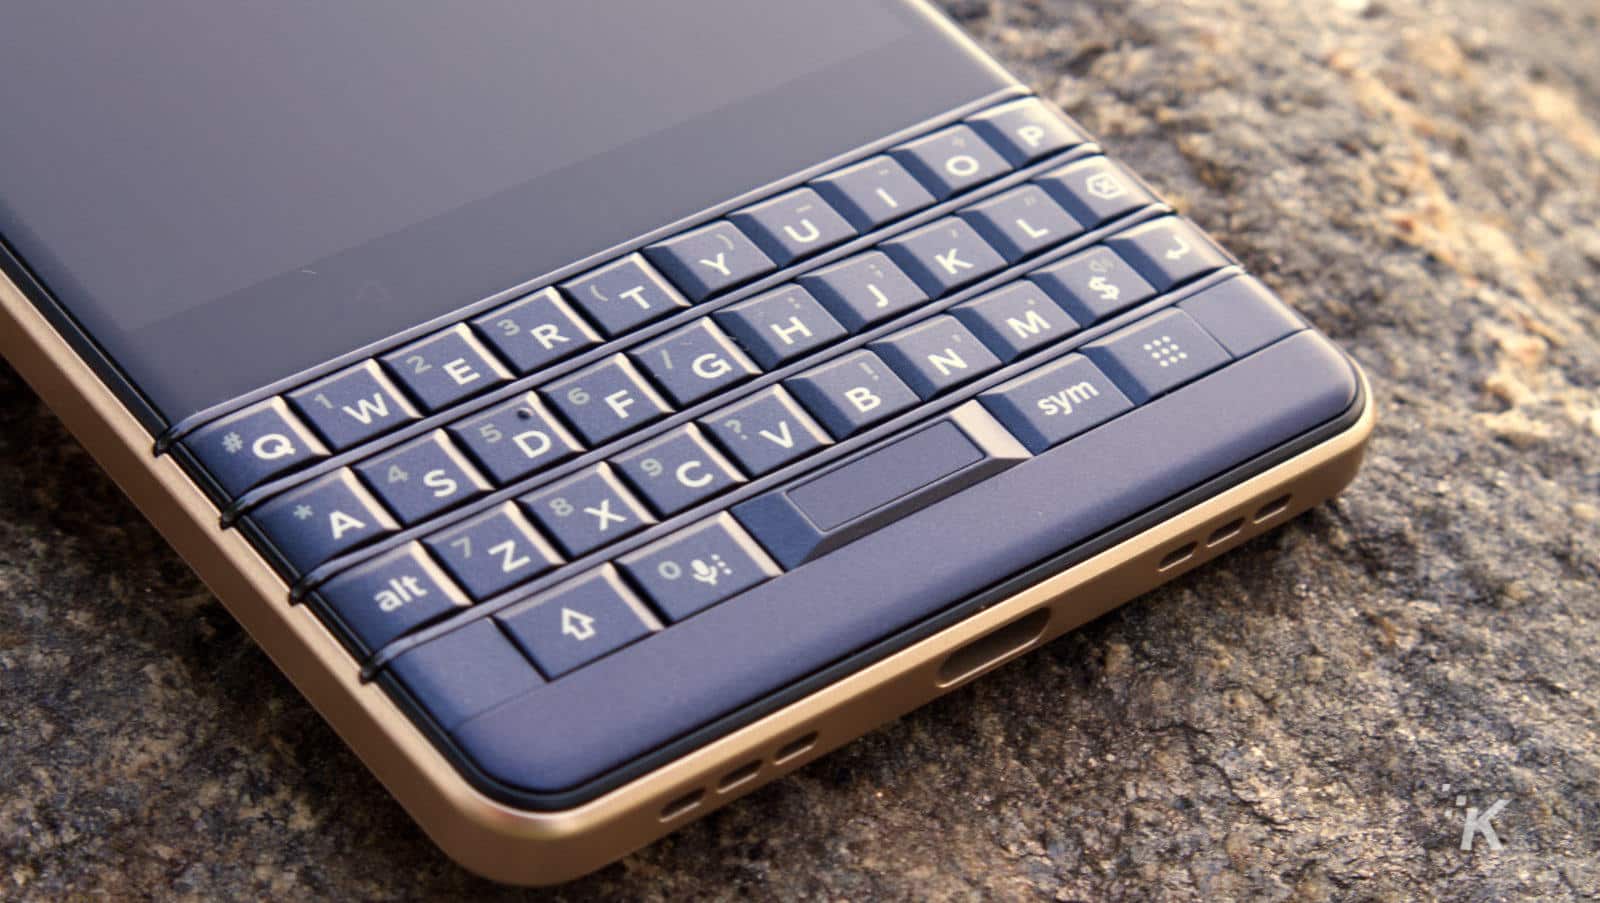 Things That Were Cool 10 Years Ago - Using a phone with a physical keyboard.